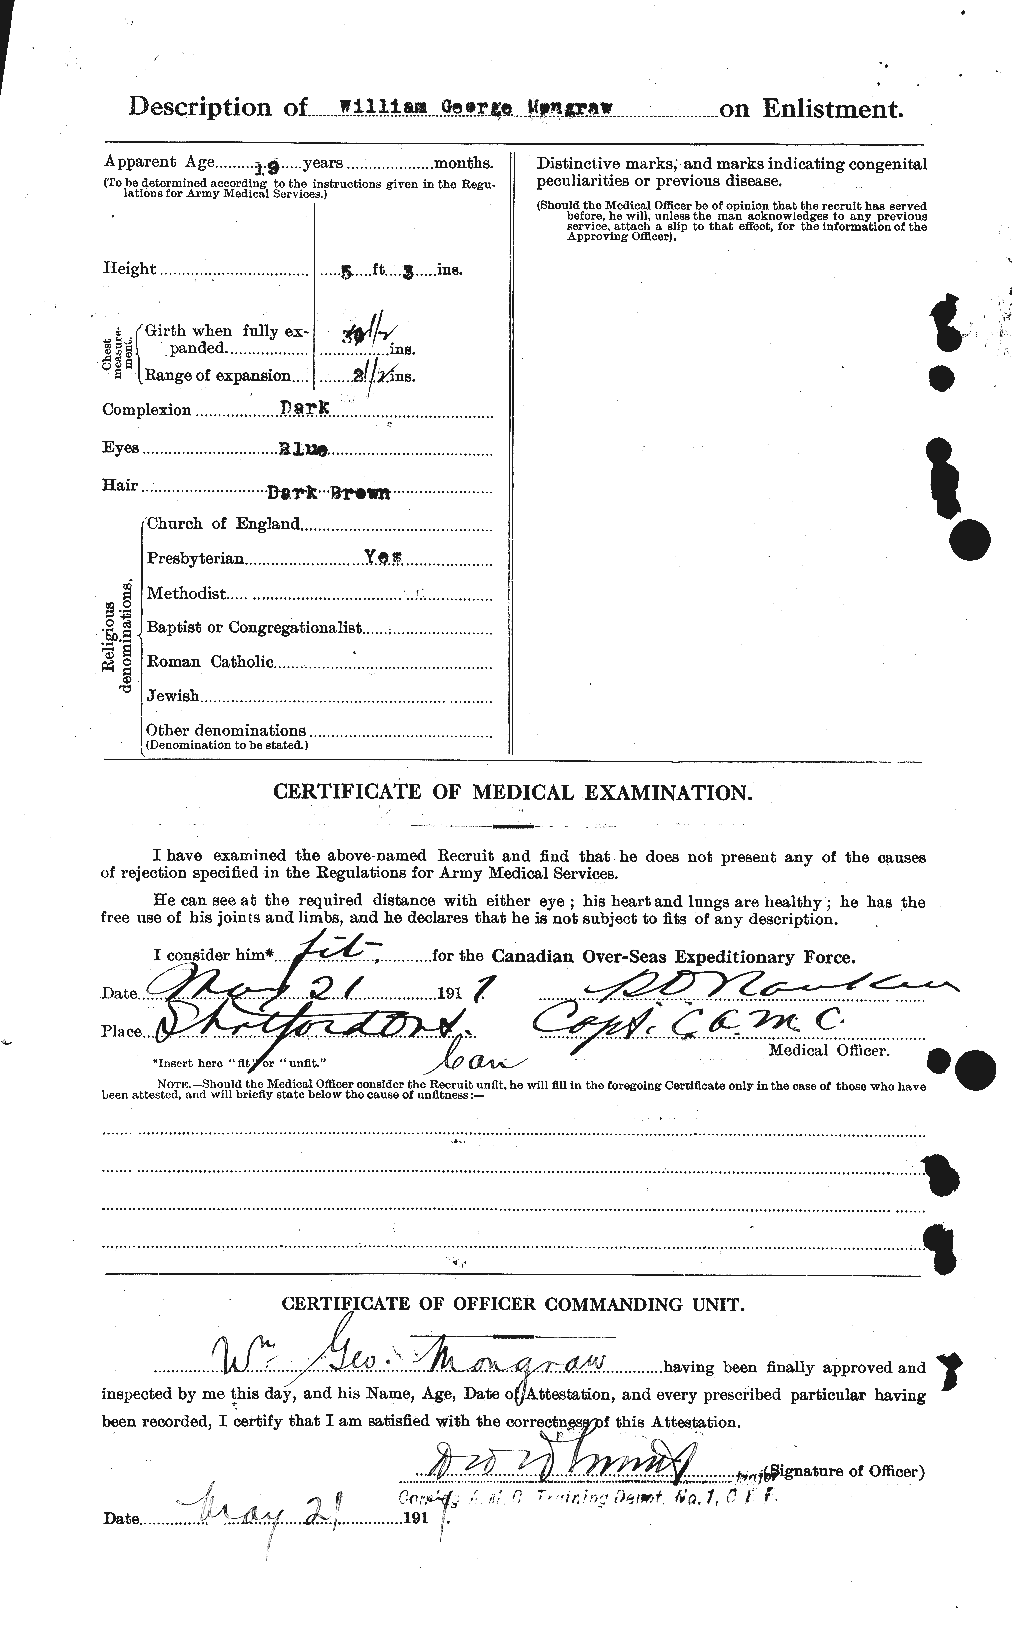 Personnel Records of the First World War - CEF 497256b